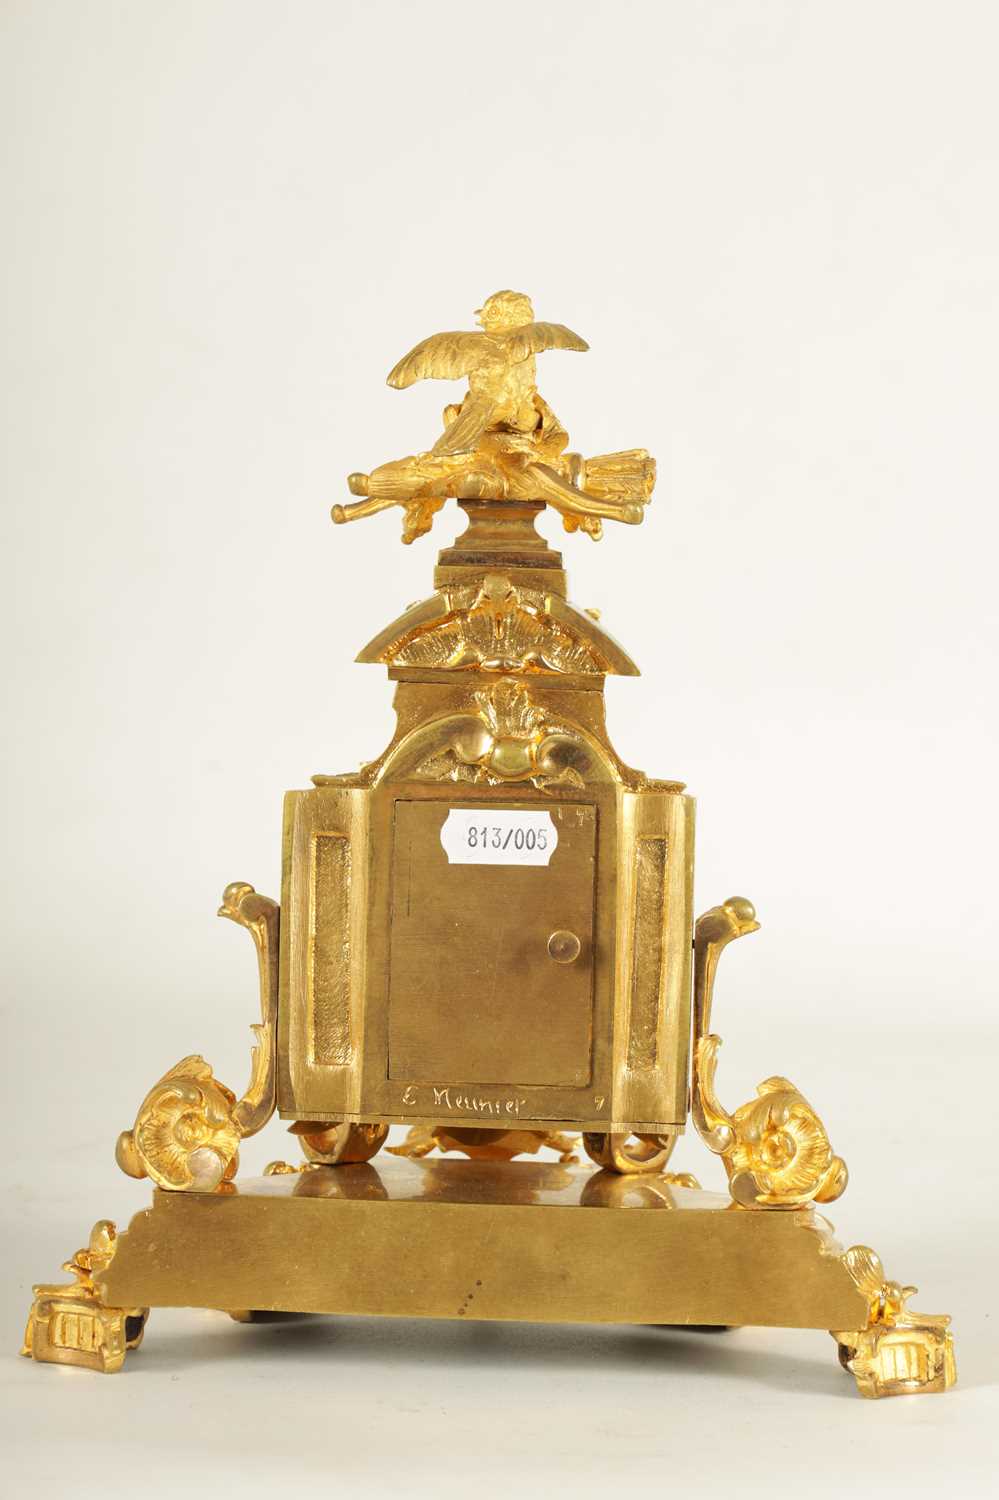 A SMALL LATE 19TH CENTURY FRENCH PORCELAIN PANELLED ORMOLU CARRIAGE STYLE MANTEL CLOCK - Image 4 of 13